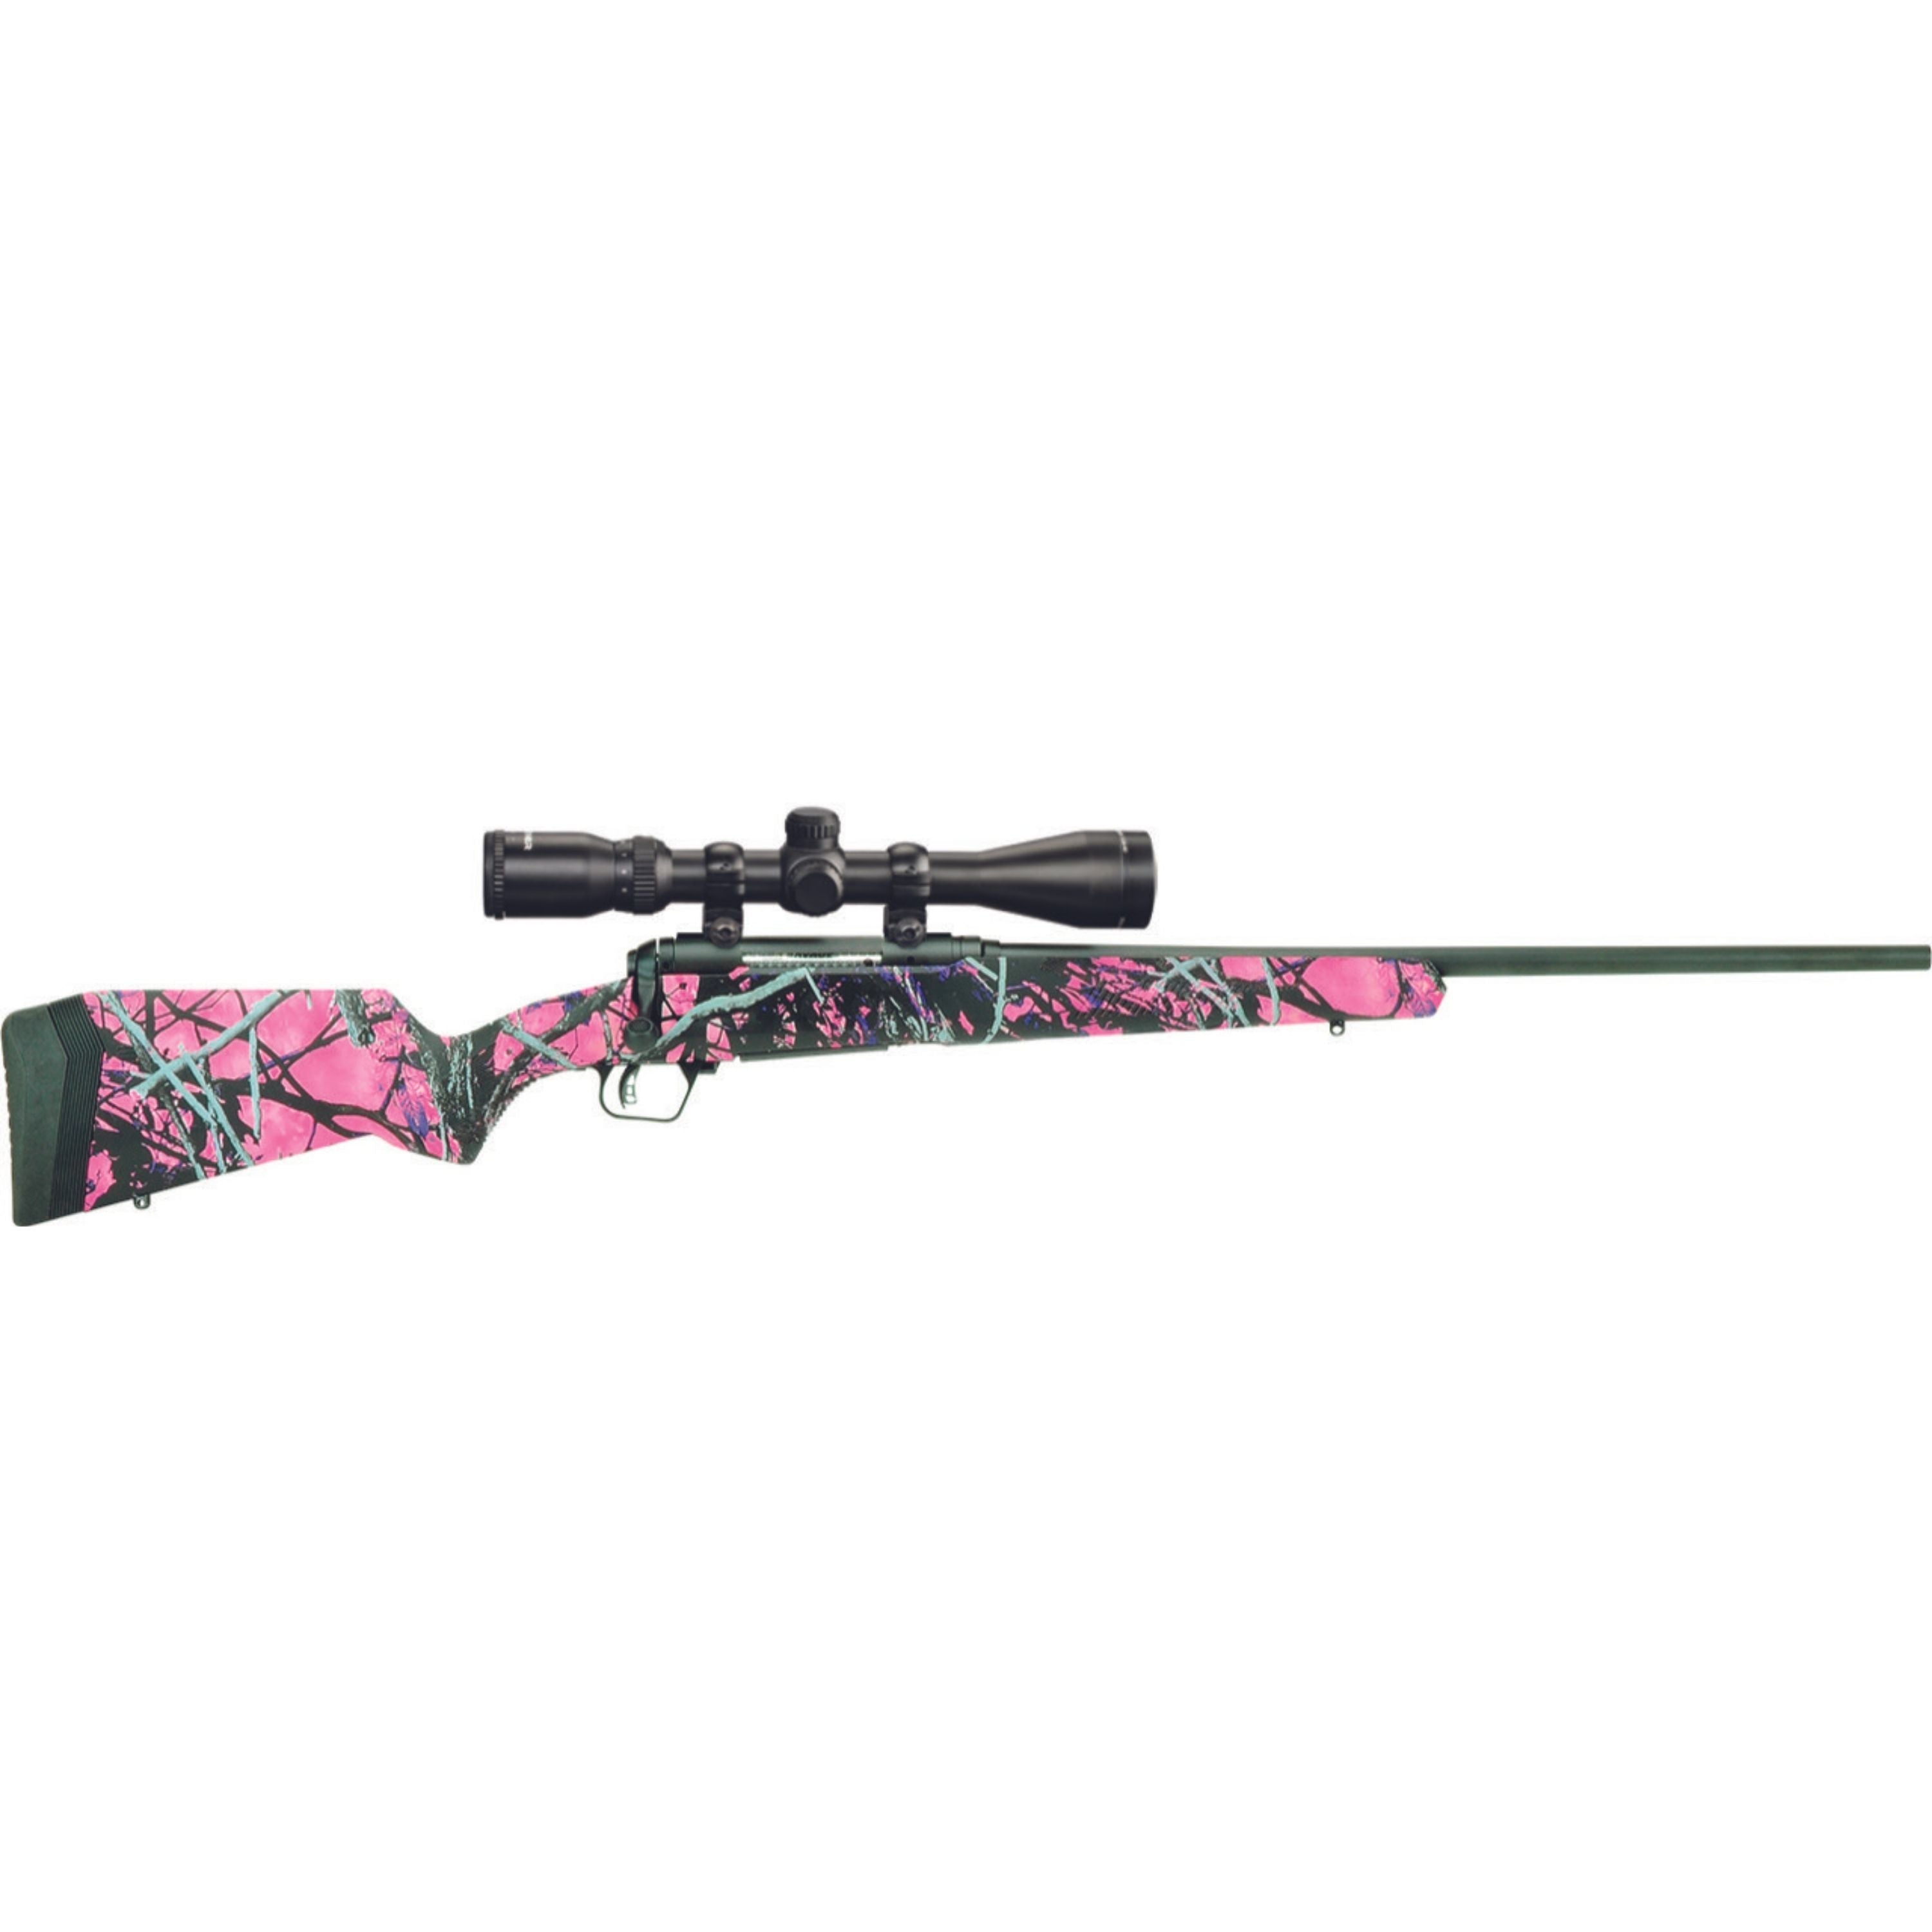 "110 Apex Hunter Muddy Girl" Bolt action rifle with scope